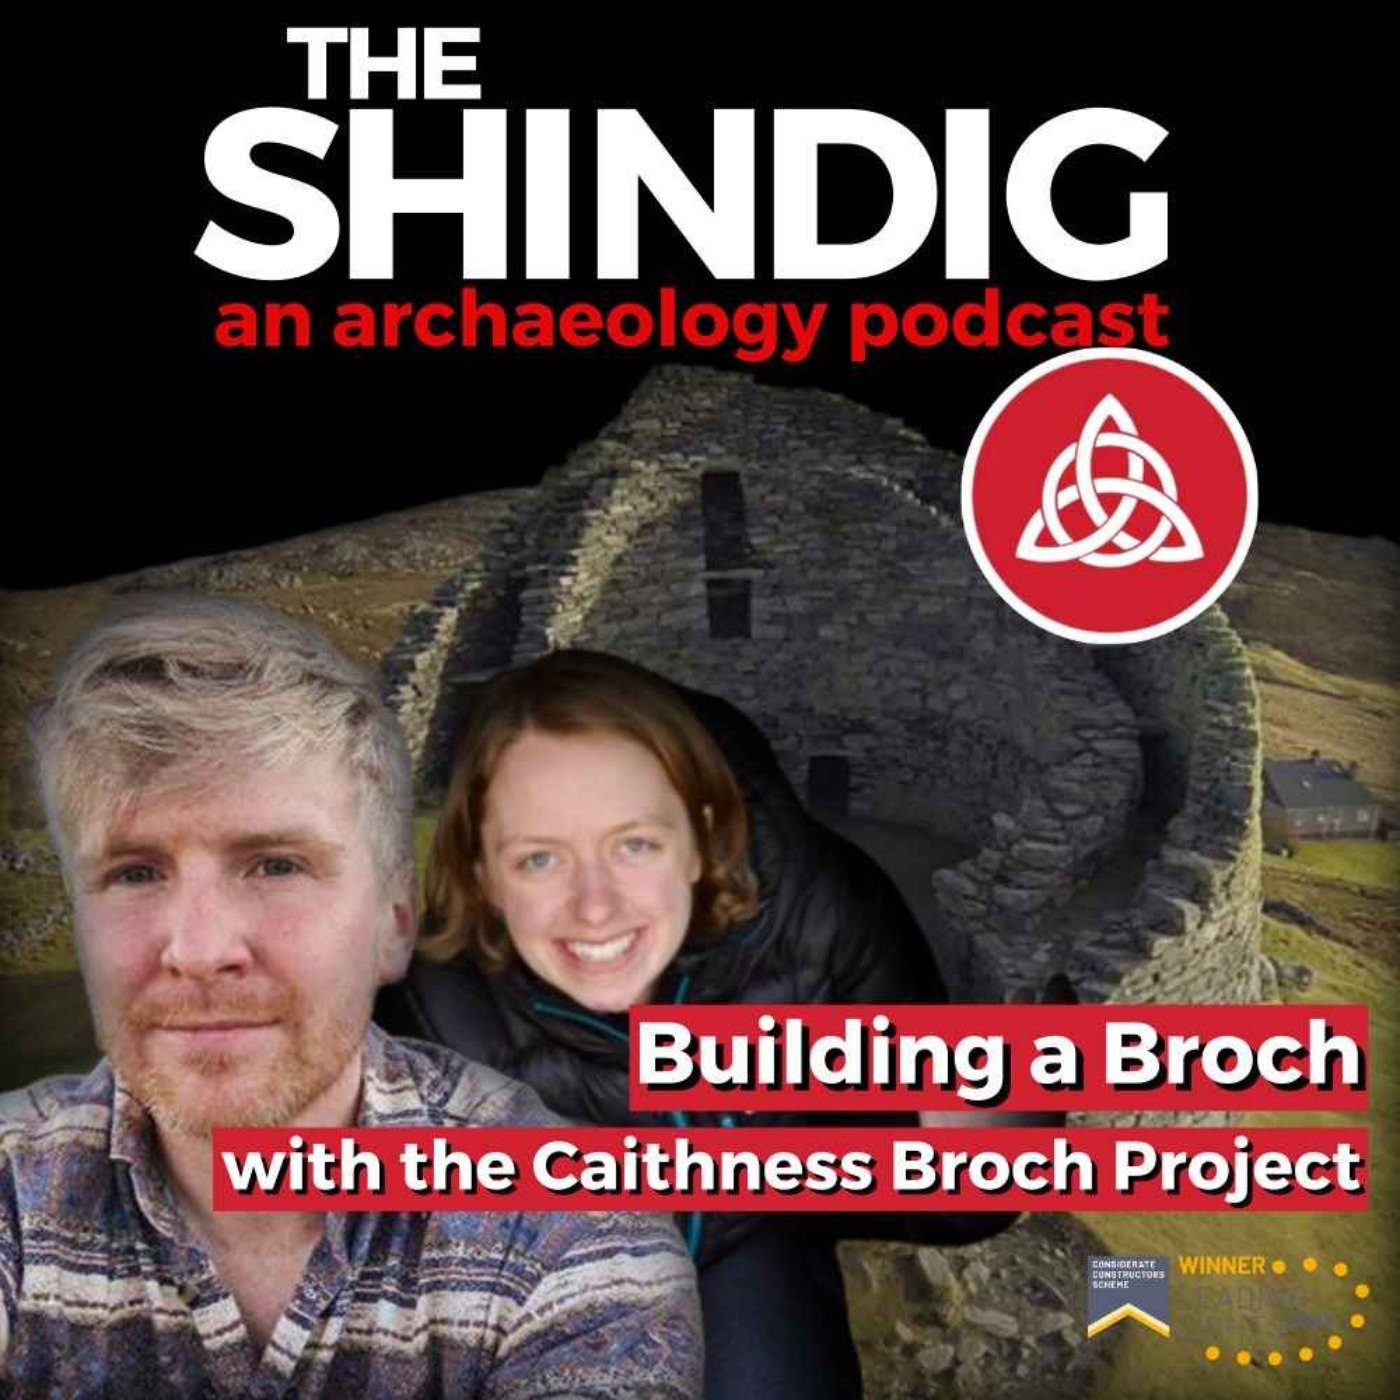 Building a Broch - with the Caithness Broch Project